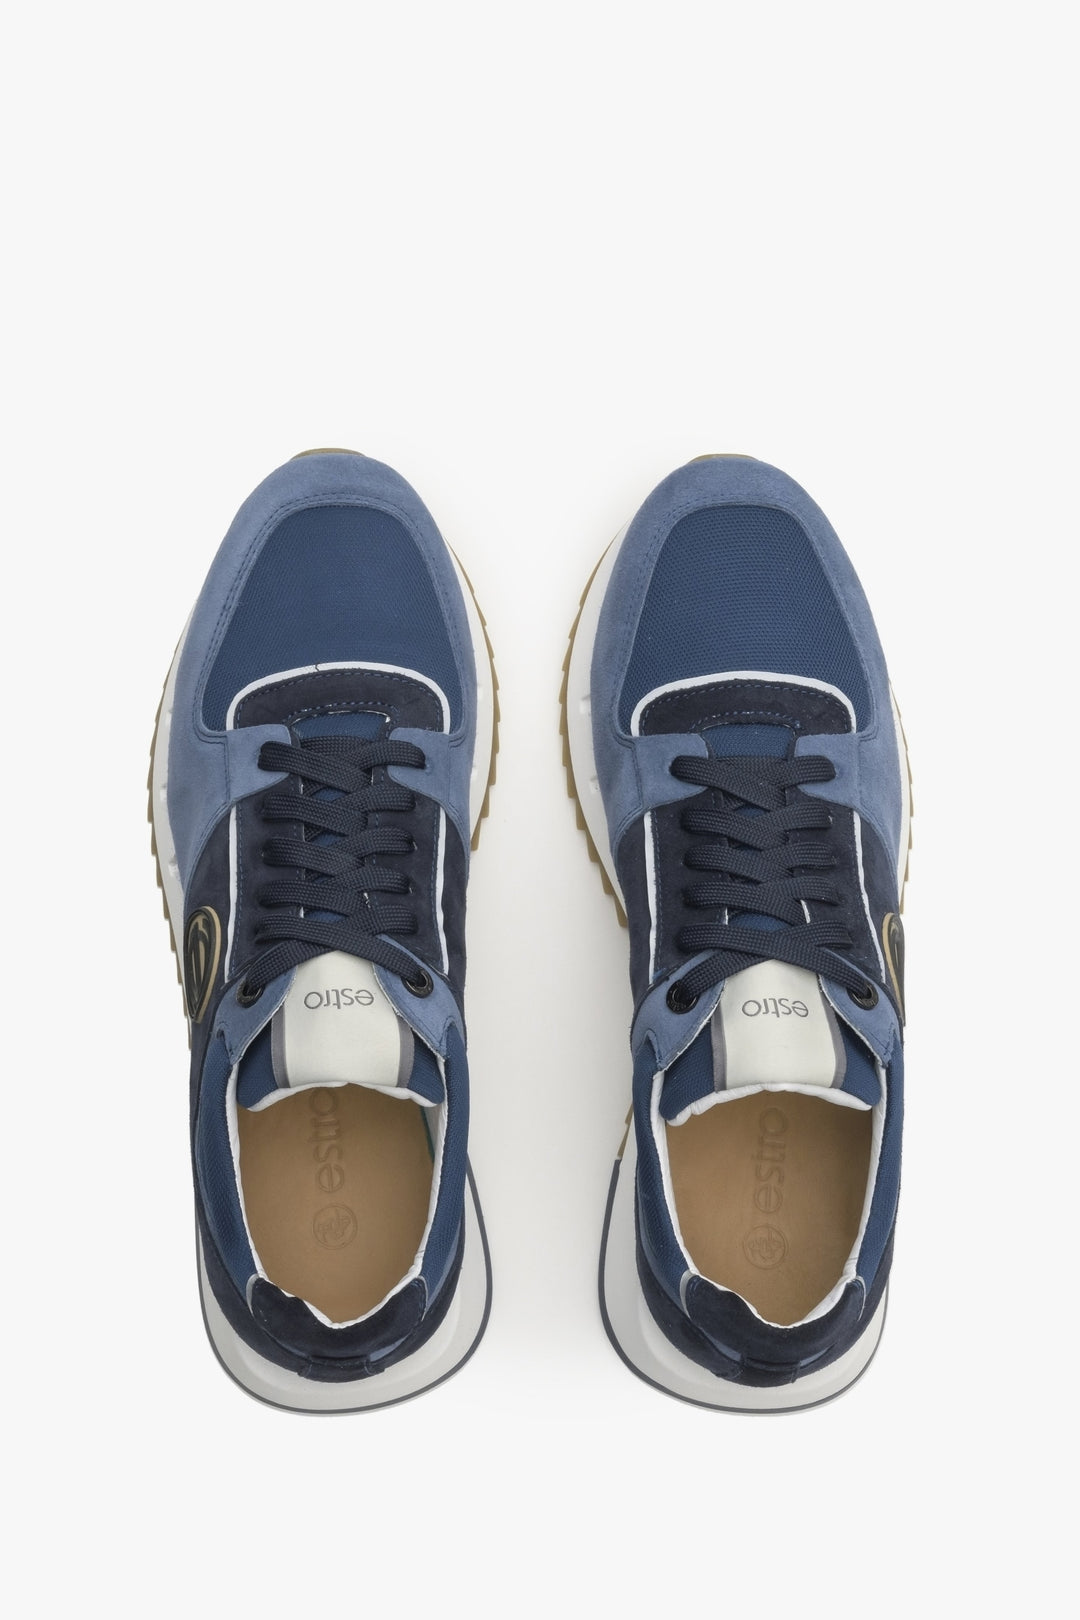 Men's black and blue sneakers made of velour - top view presentation of the footwear.